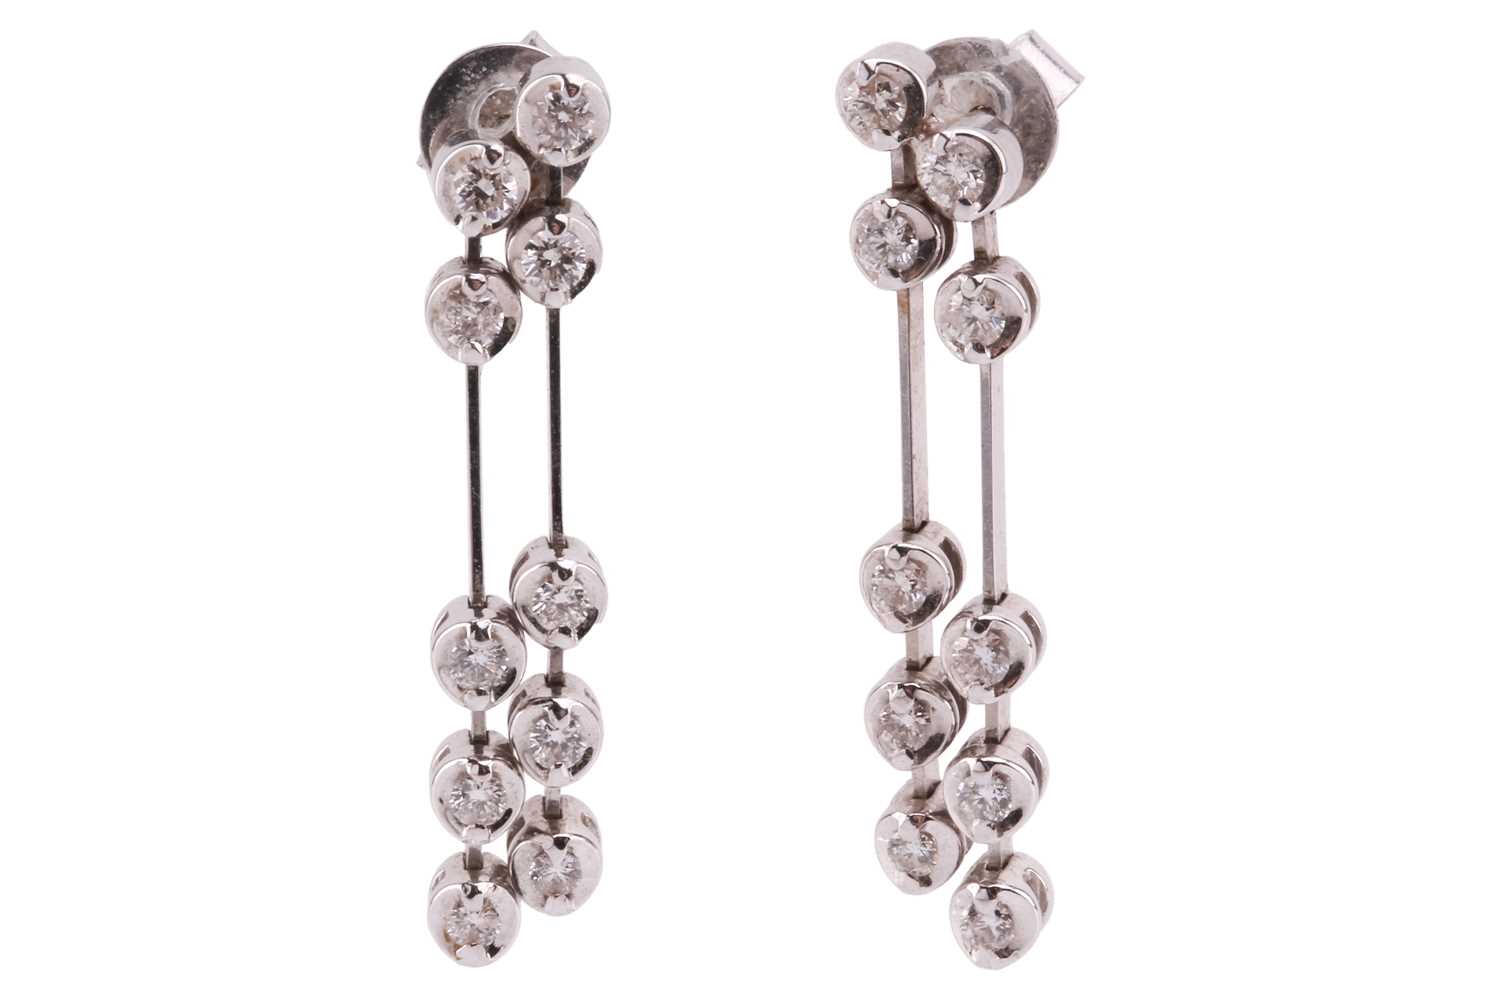 A pair of diamond drop earrings in 18ct white gold, each containing two lines of articulated